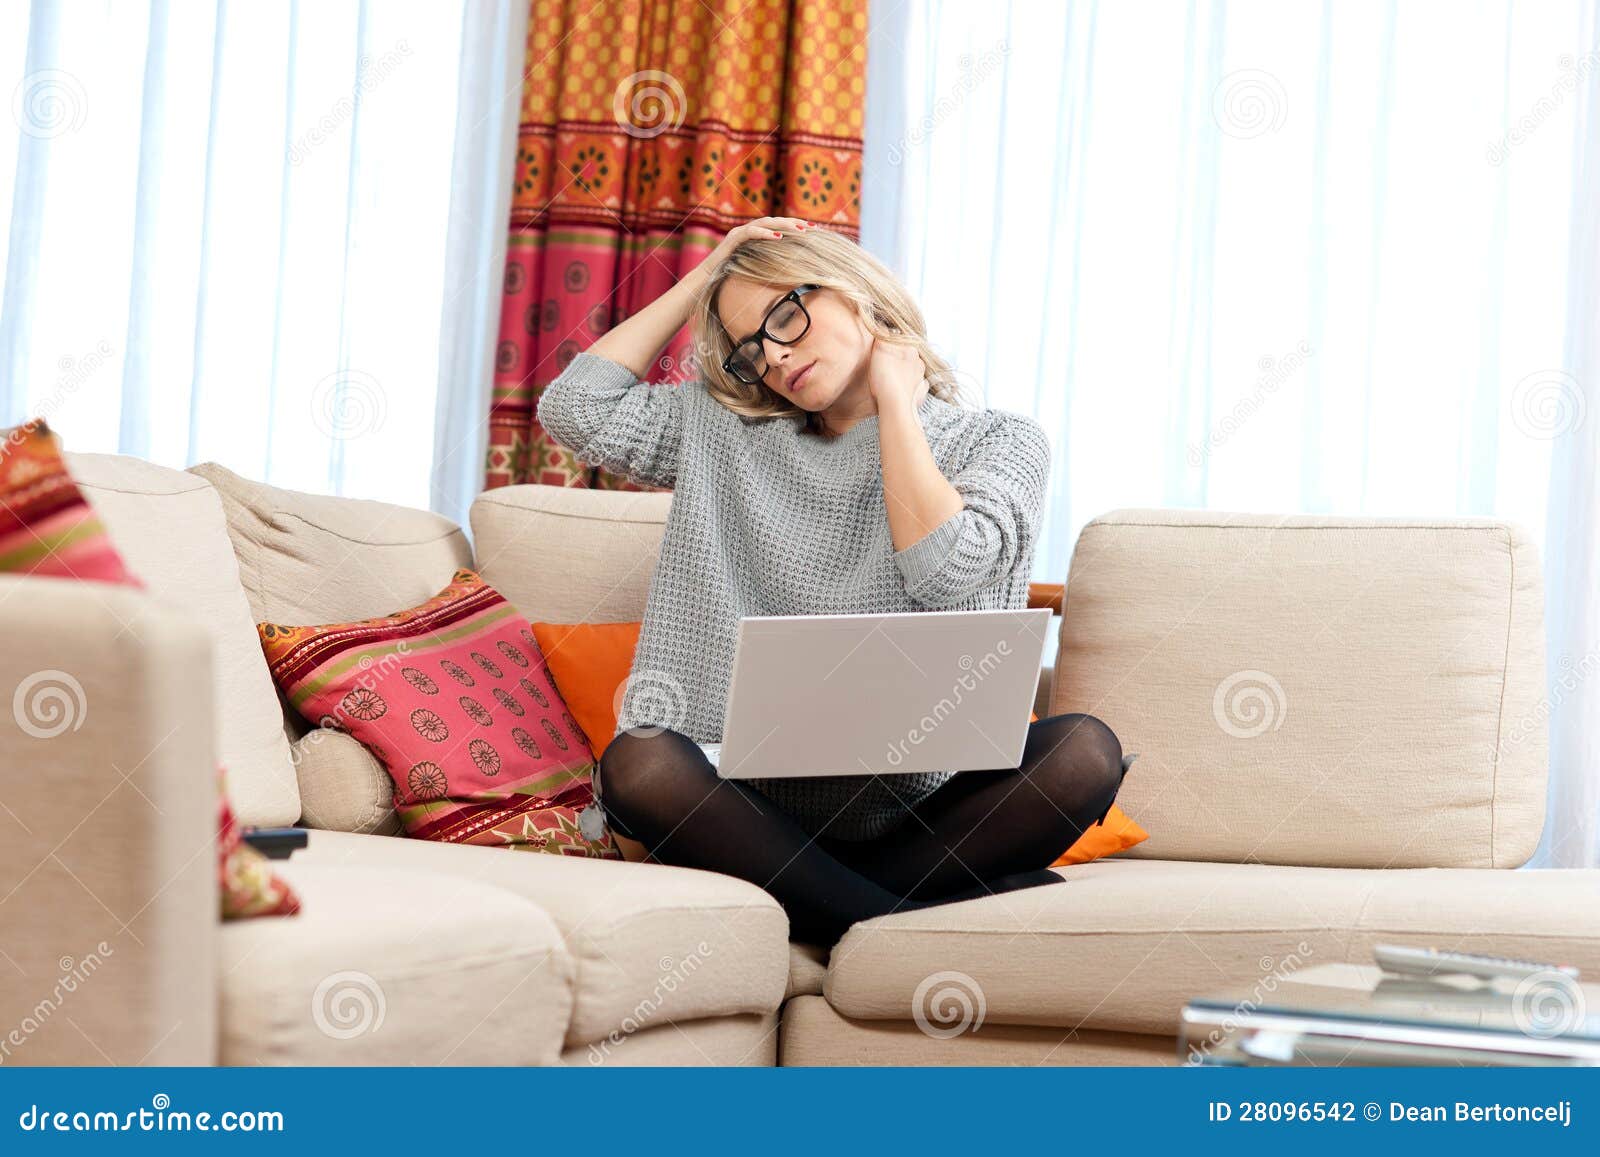 attractive woman with laptop having neck pain